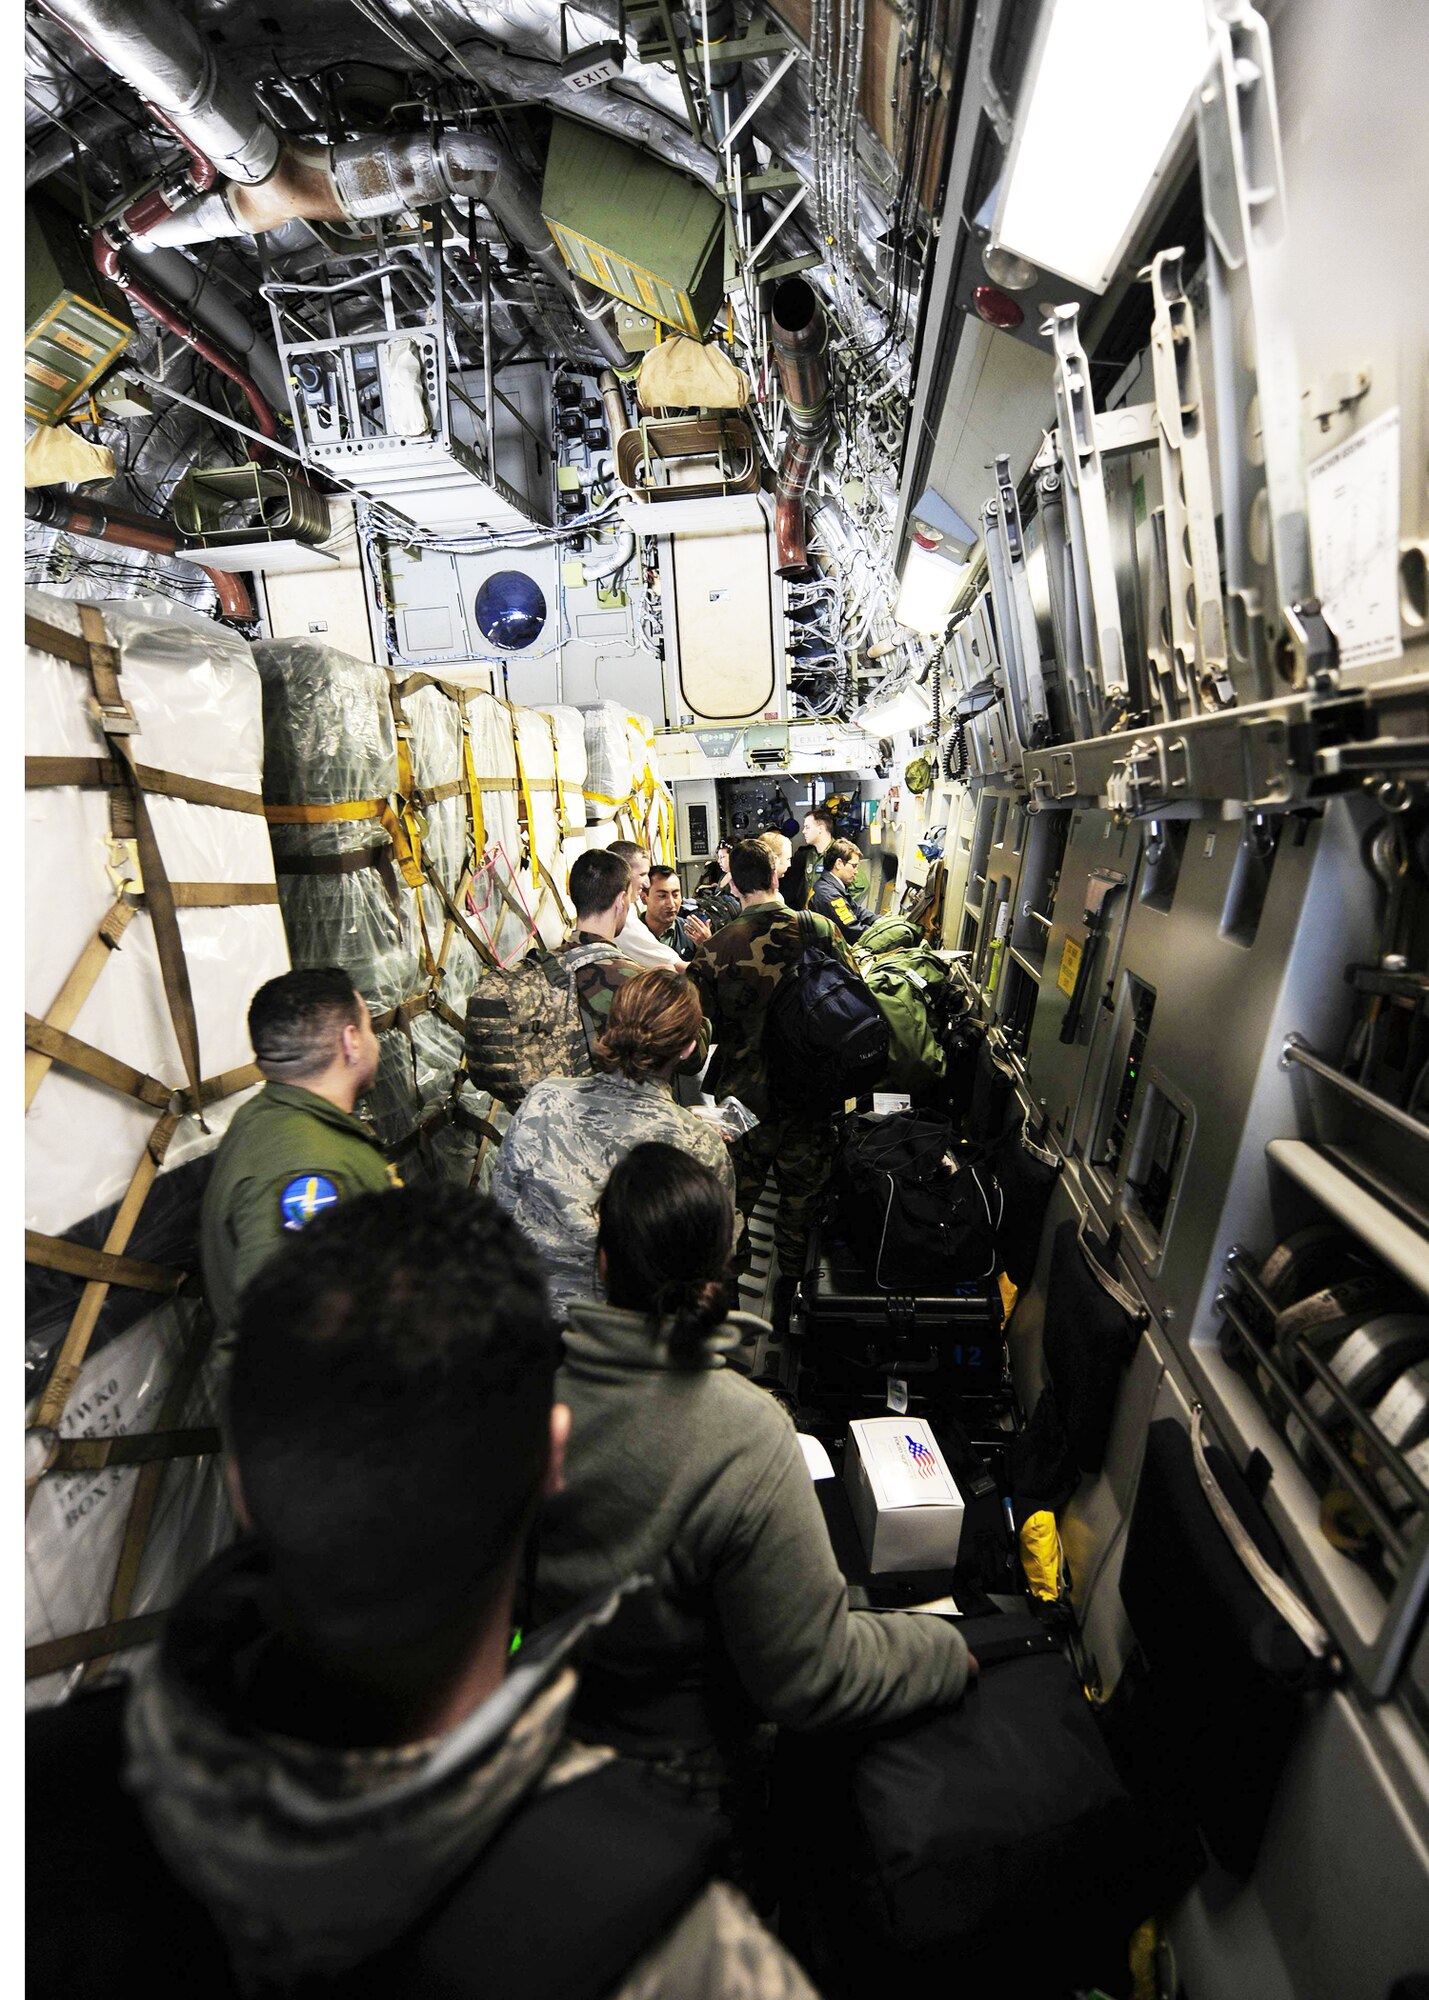 Airmen load onto a C-17 Globemaster III awaiting departure March 8, 2010, from Lackland Air Force Base, Texas. The Airmen are part of an Air Force Expeditionary Medical Support team that deployed to Angol, Chile, to augment medical care for more than 110,000 Chileans in the region. (U.S. Air Force photo/Senior Airman Tiffany Trojca)